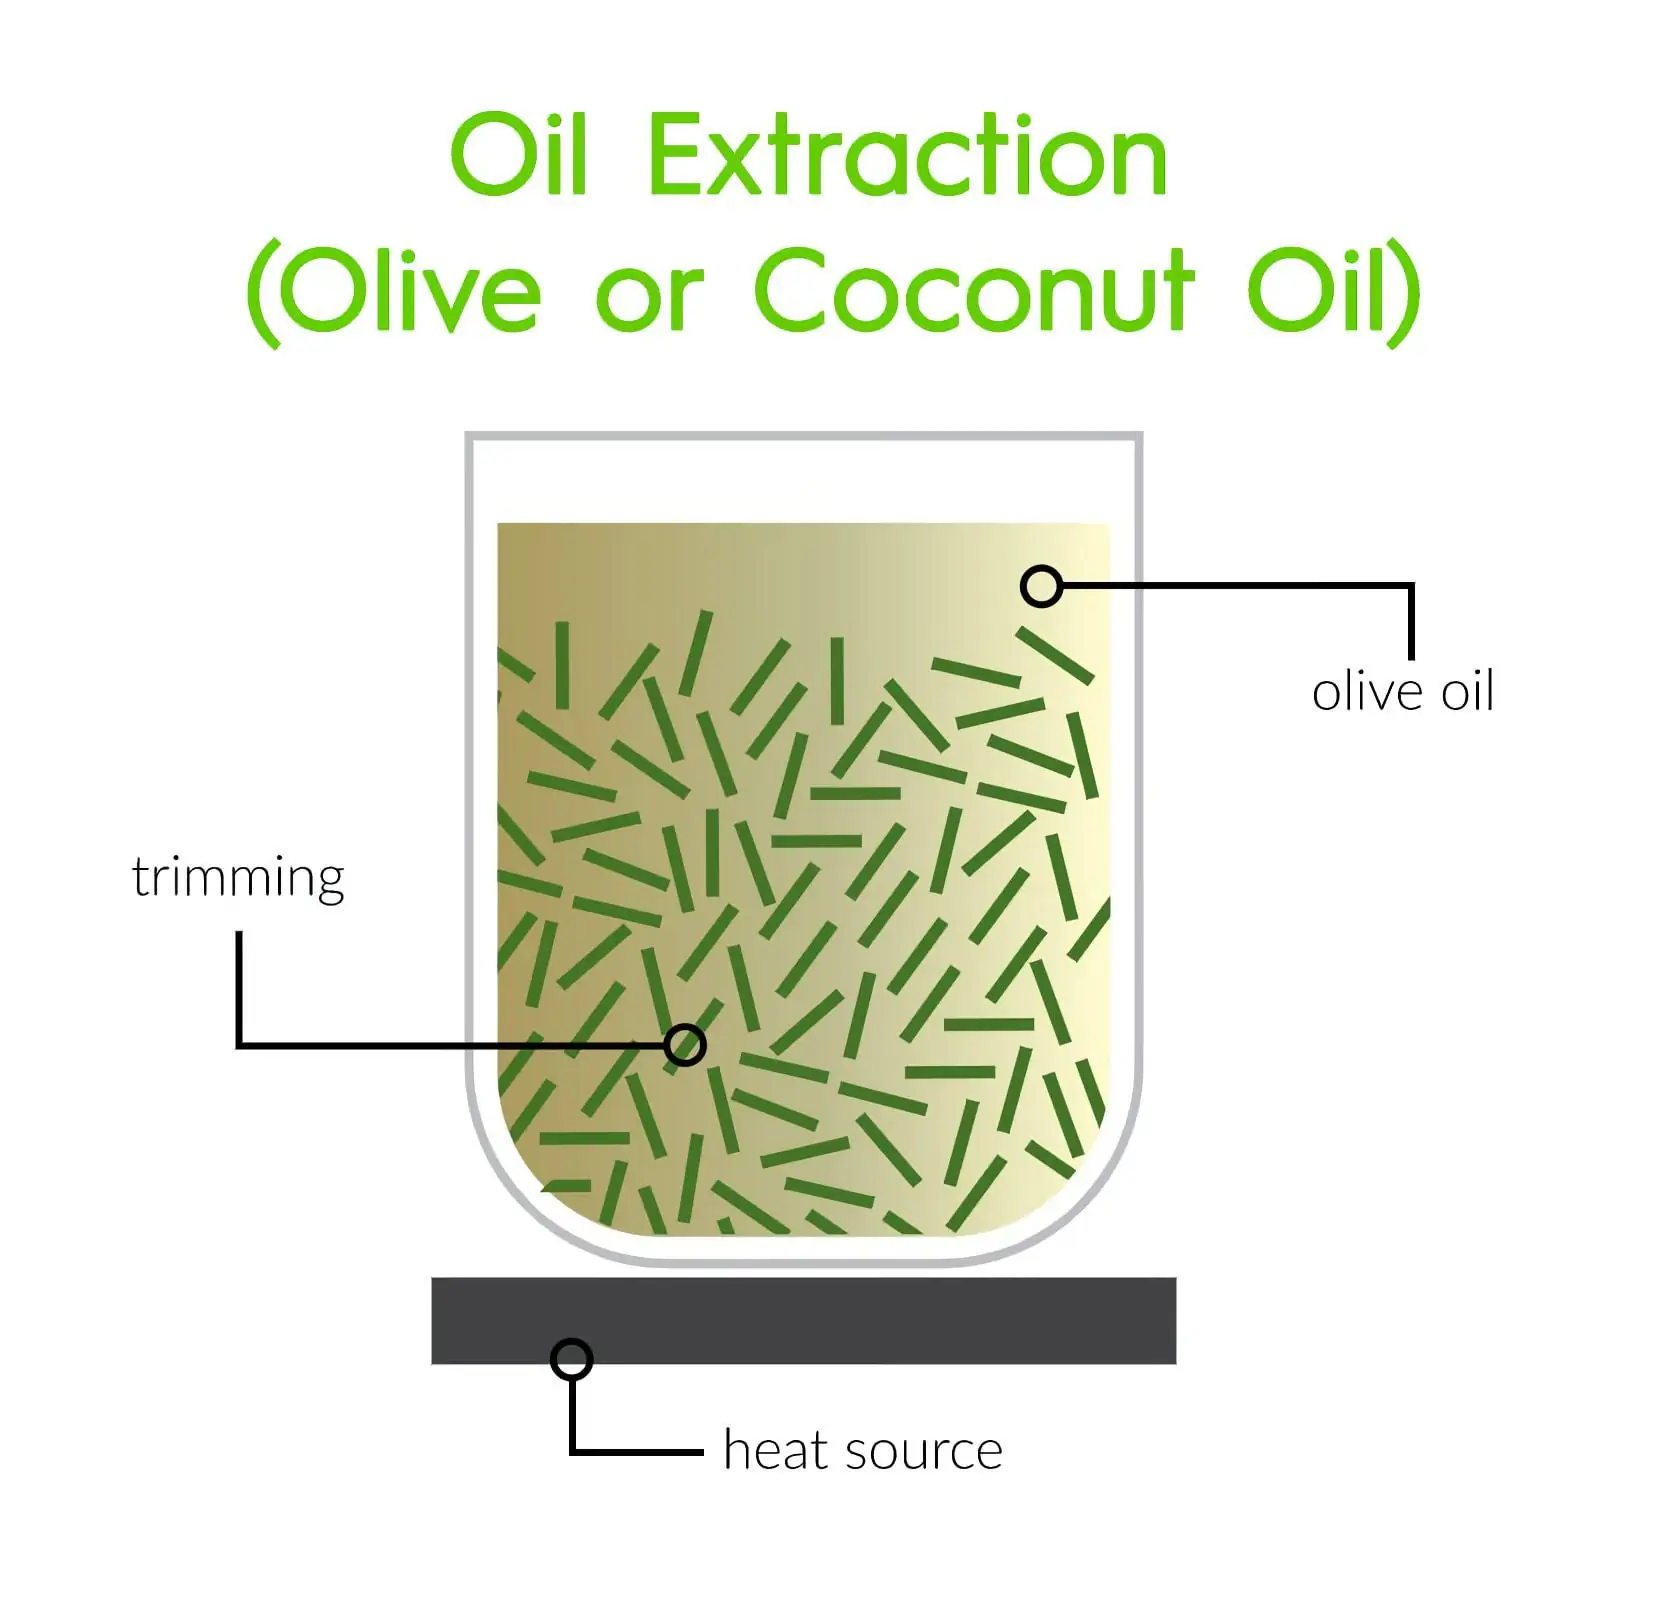 Oil extraction Using Olive or Coconut Oil